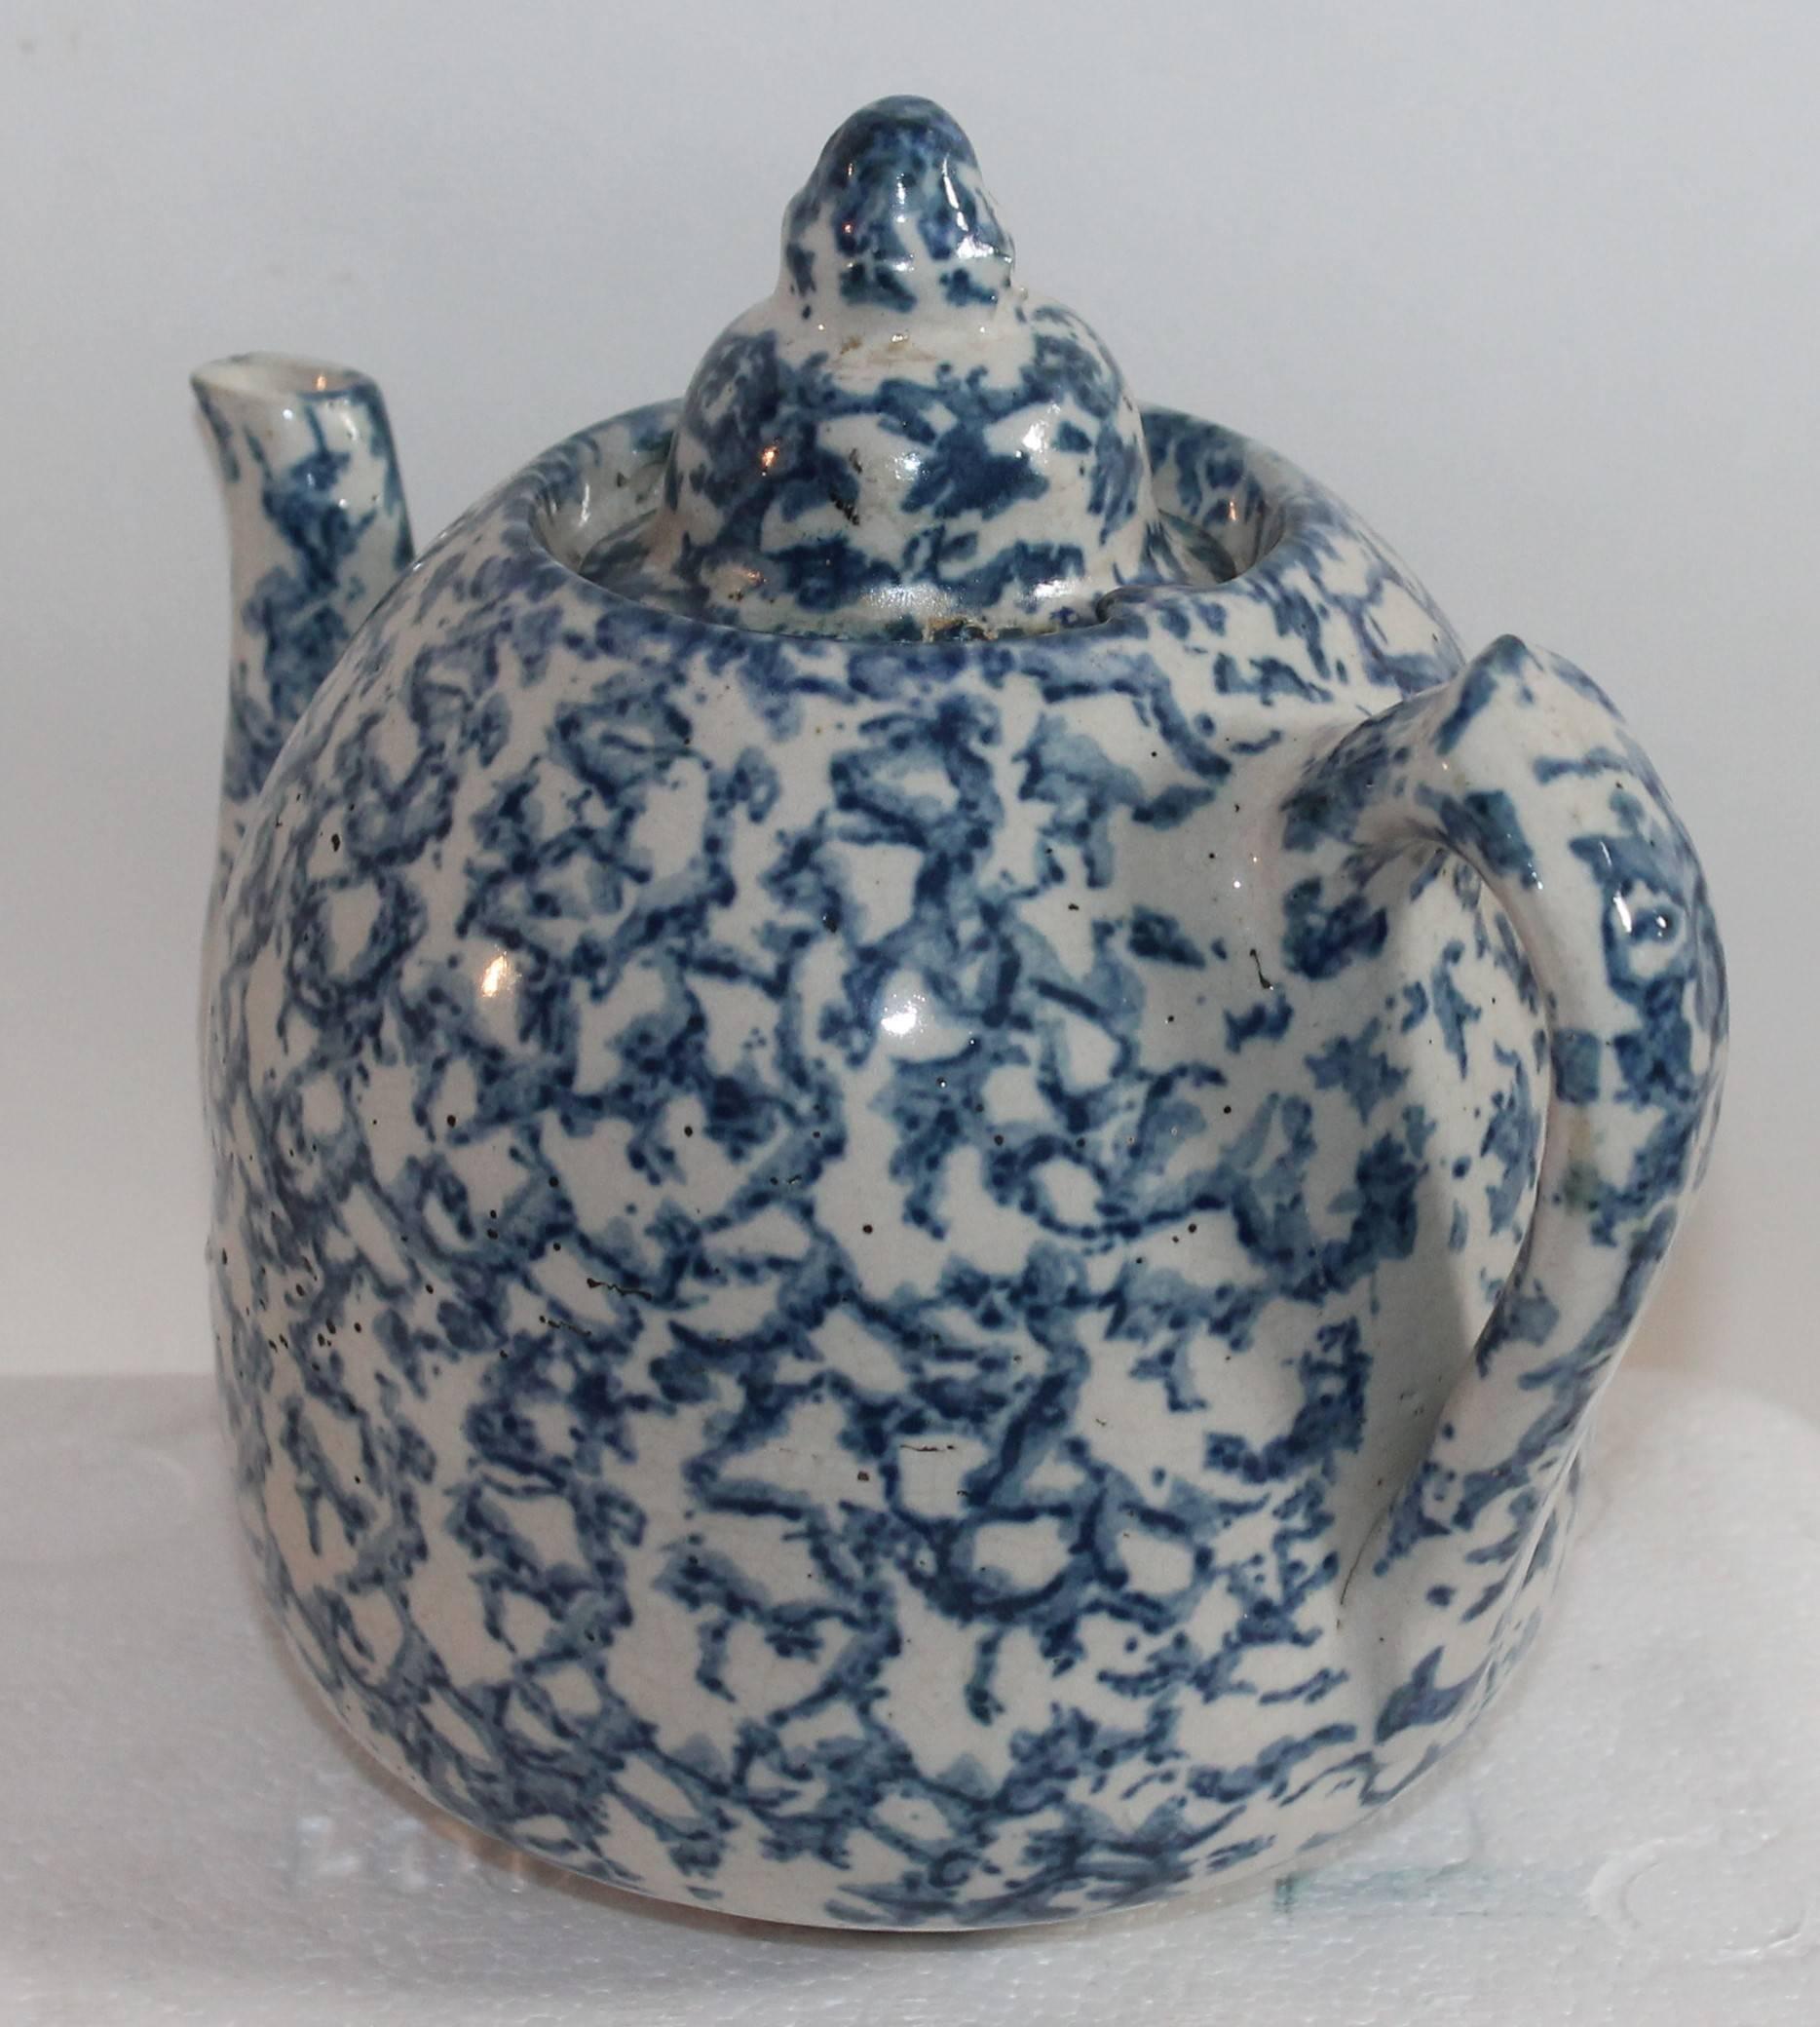 American 19th Century Sponge Ware Teapot with Lid, Very Rare For Sale